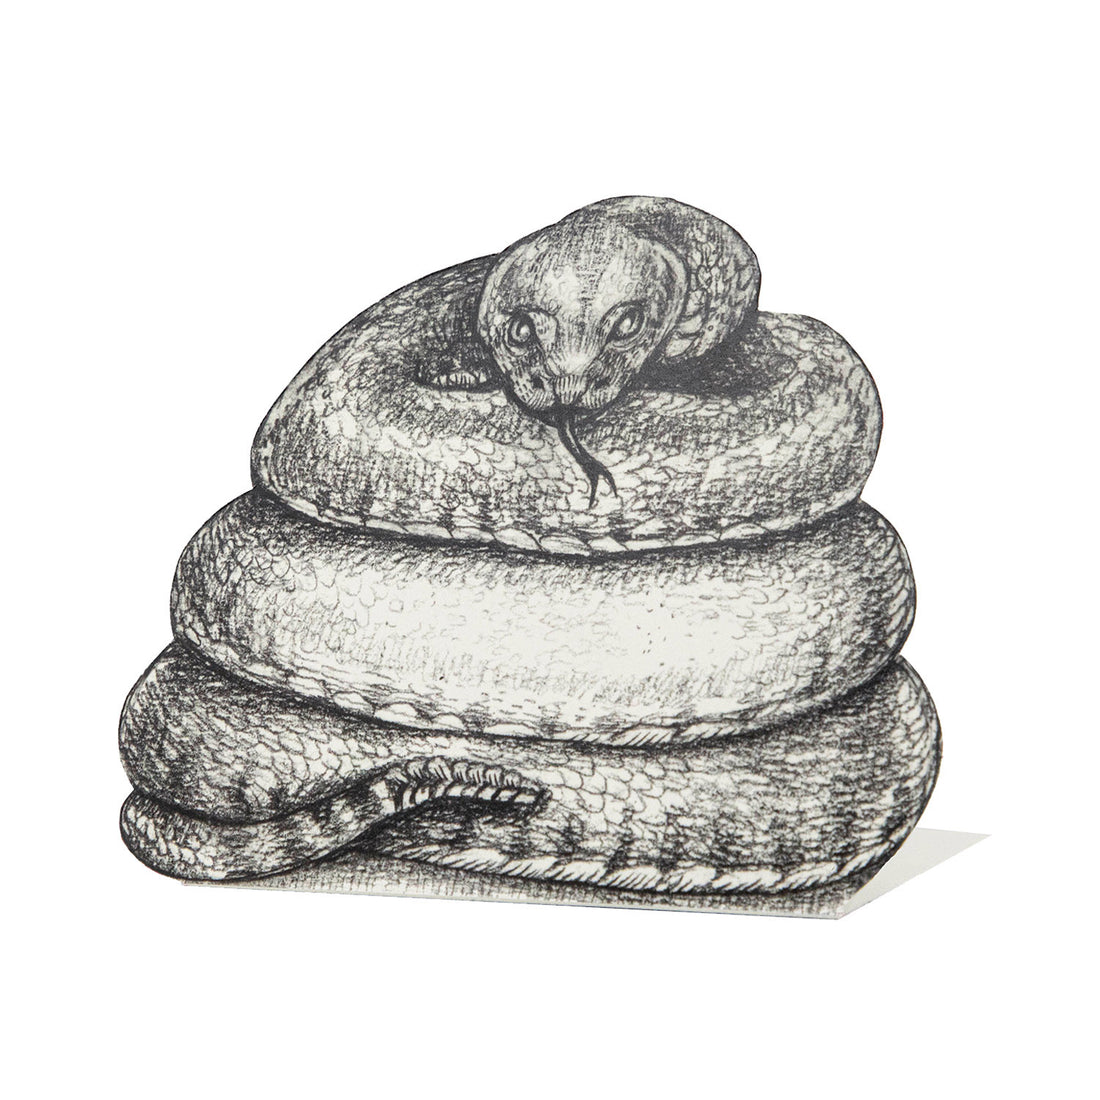 A pencil-drawn black and white coiled snake as a die-cut freestanding place card.